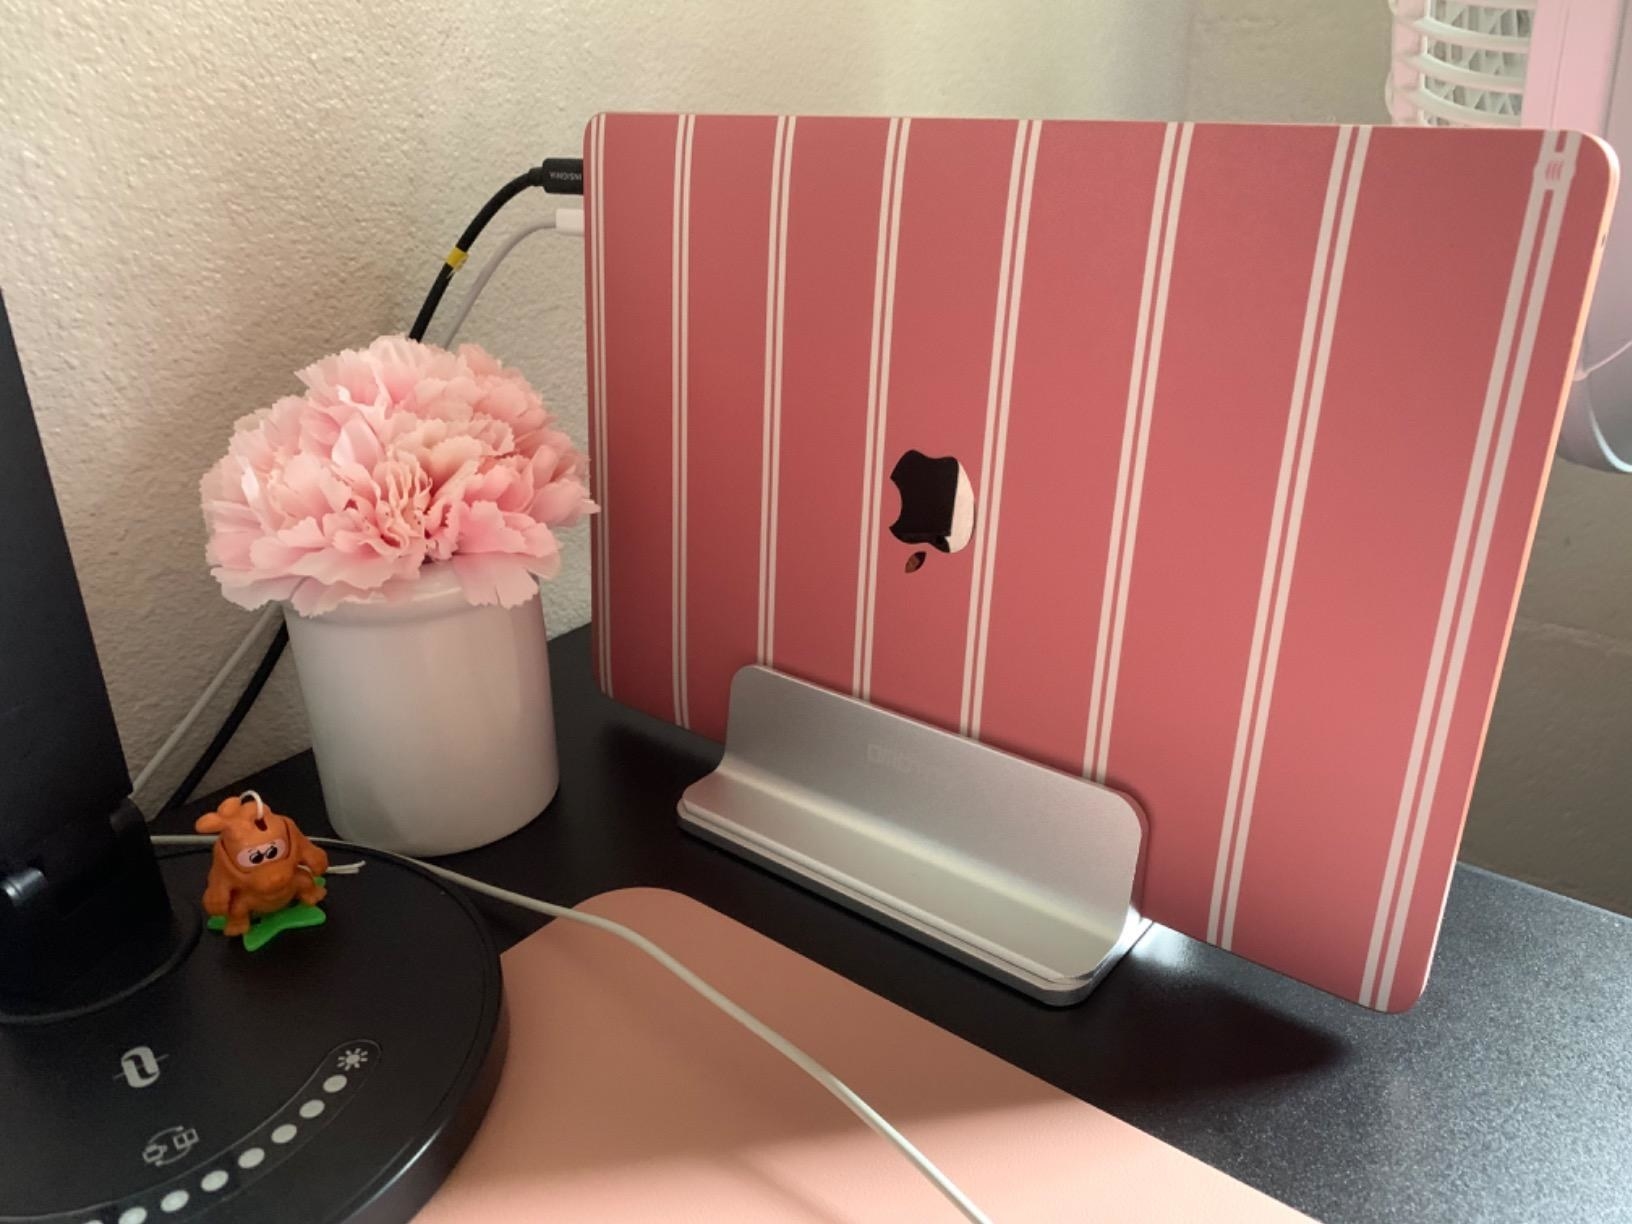 the silver stand with a MacBook in its charger